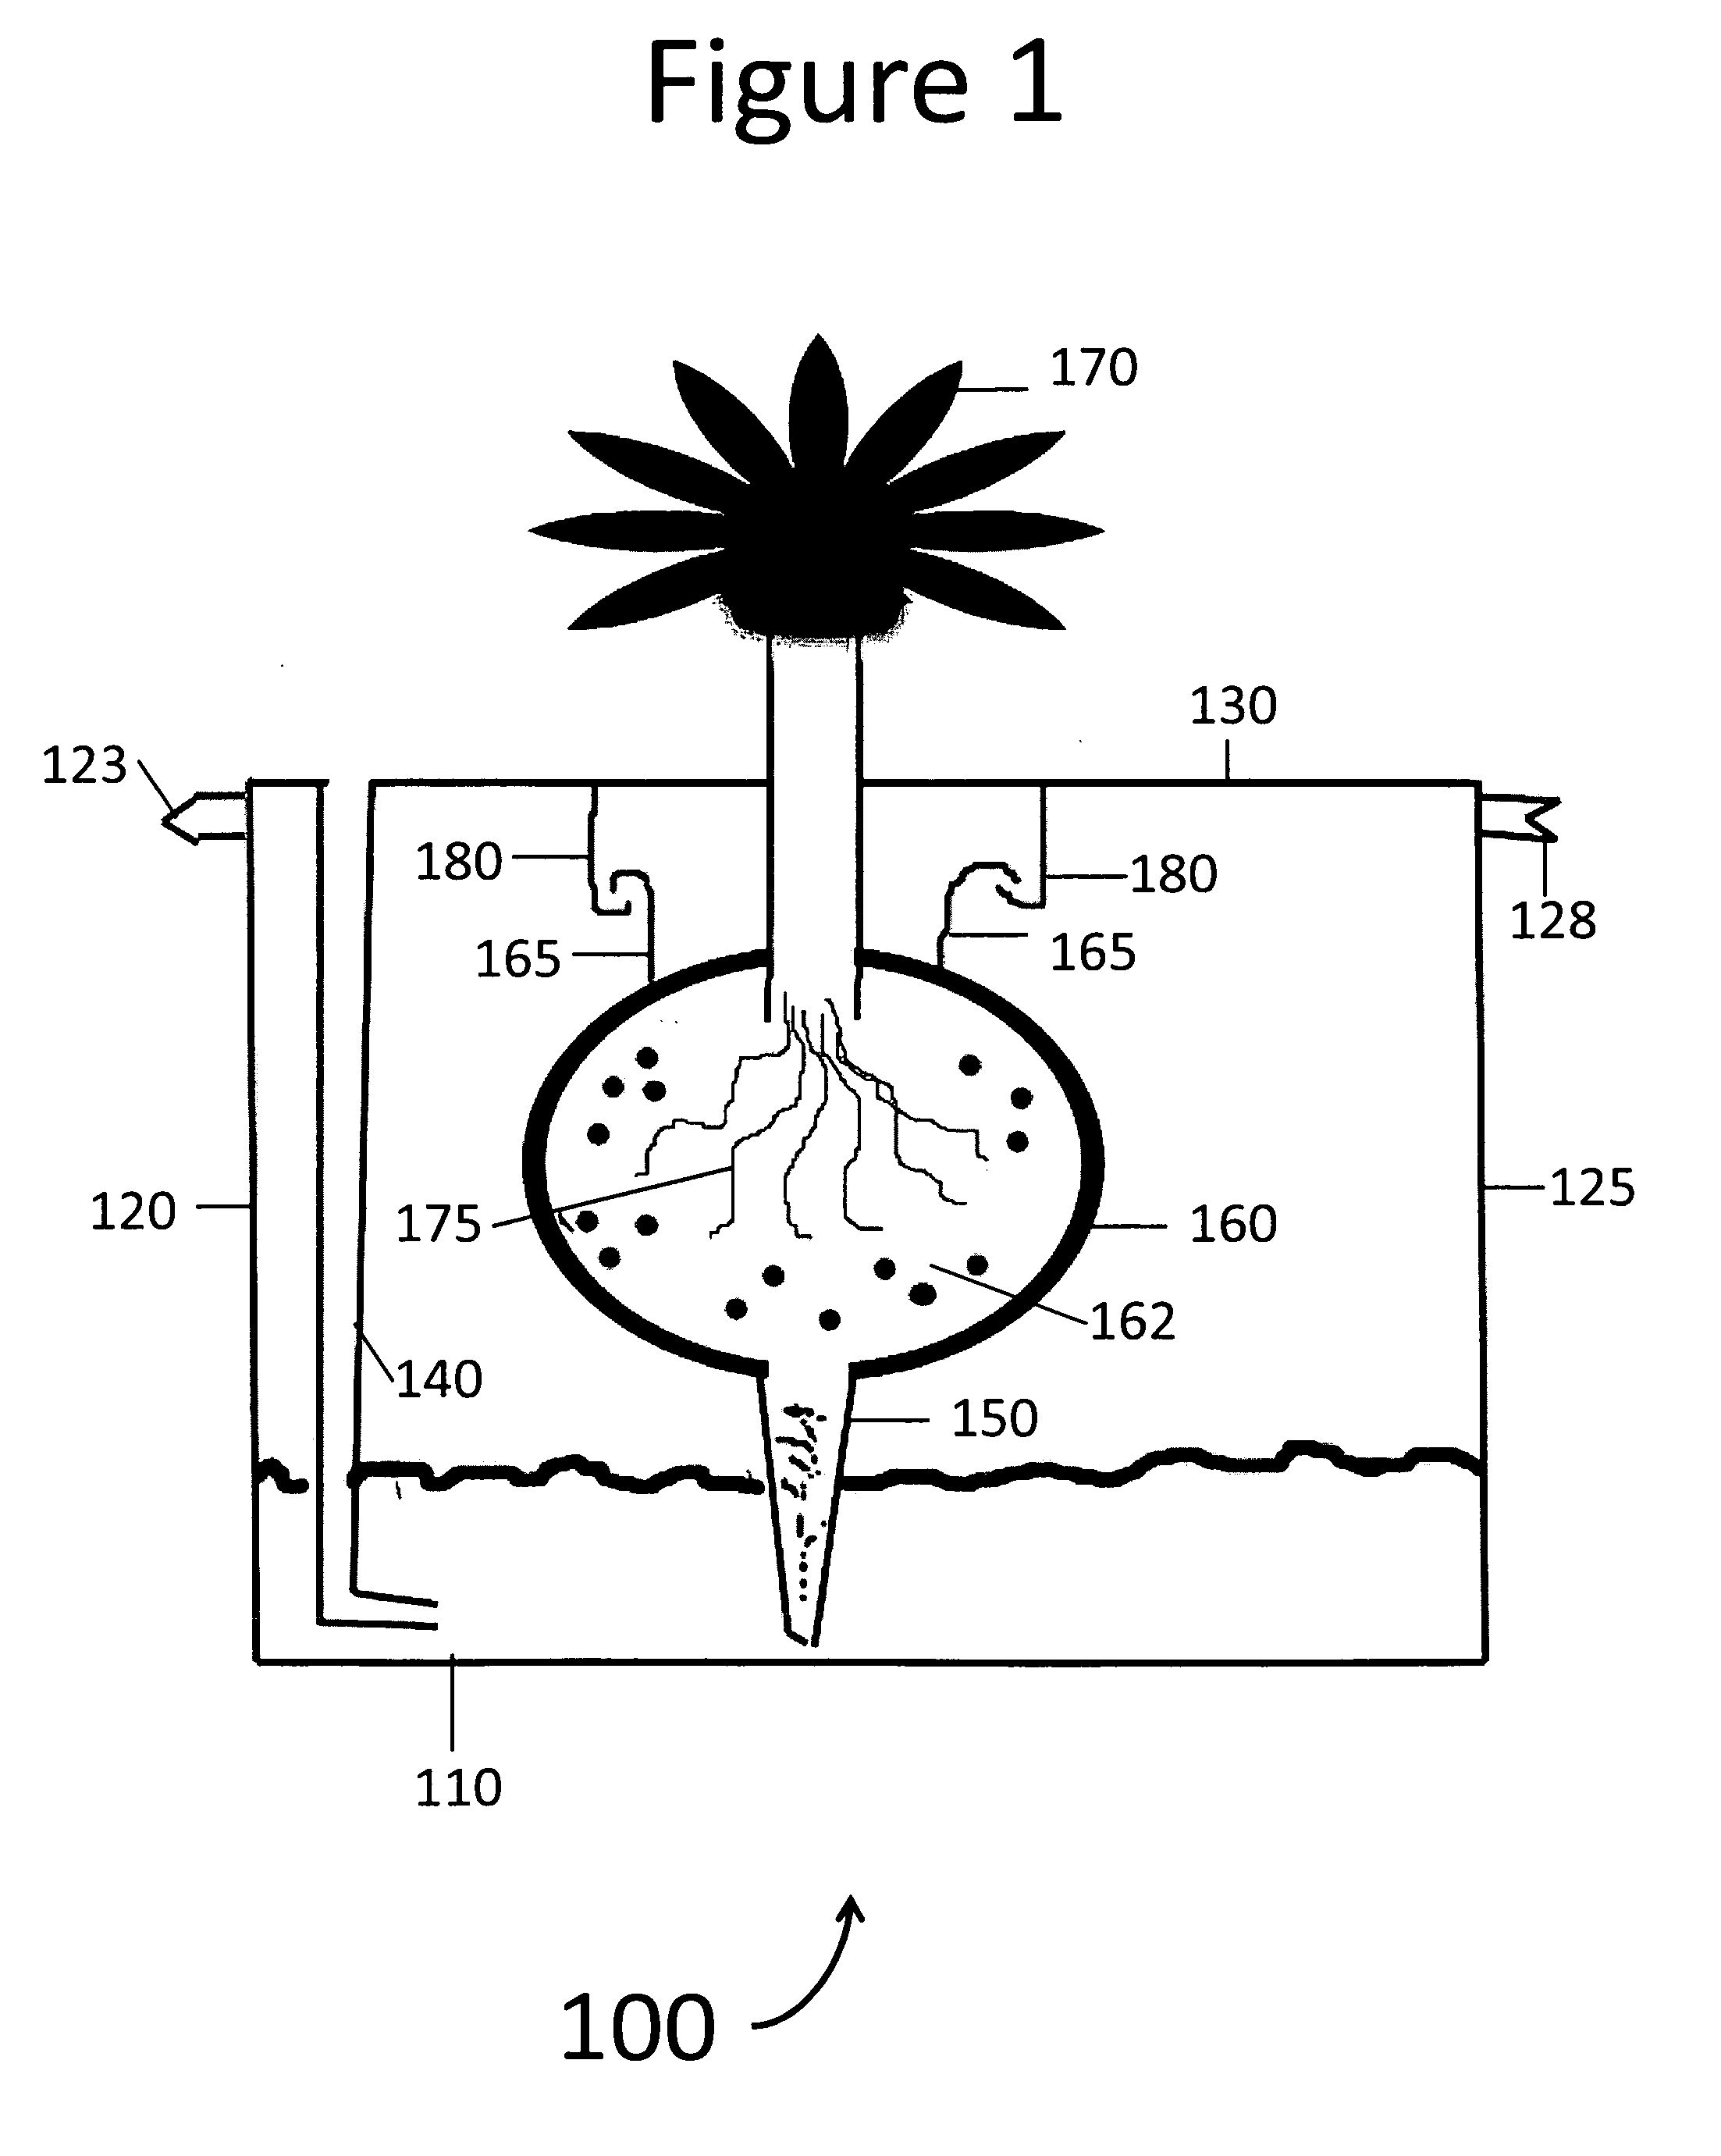 Systems for roof irrigation, including modular apparatus with sub-irrigation technology, and methods for installation and maintenance of systems